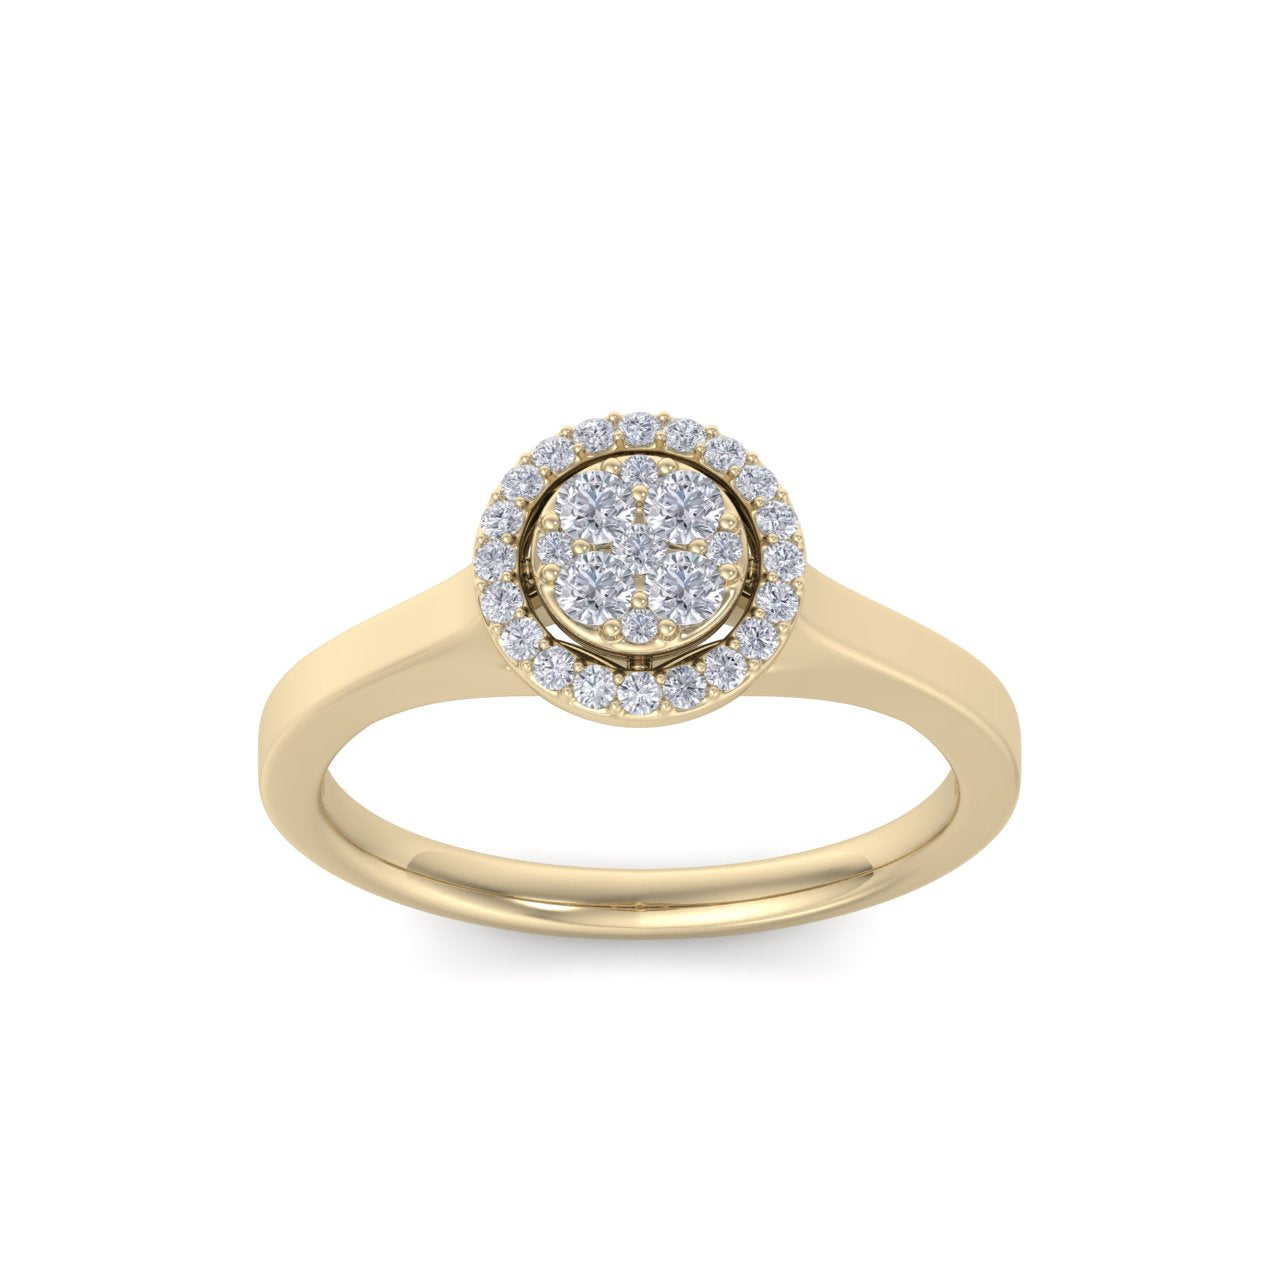 Halo engagement ring in yellow gold with white diamonds of 0.77 ct in weight